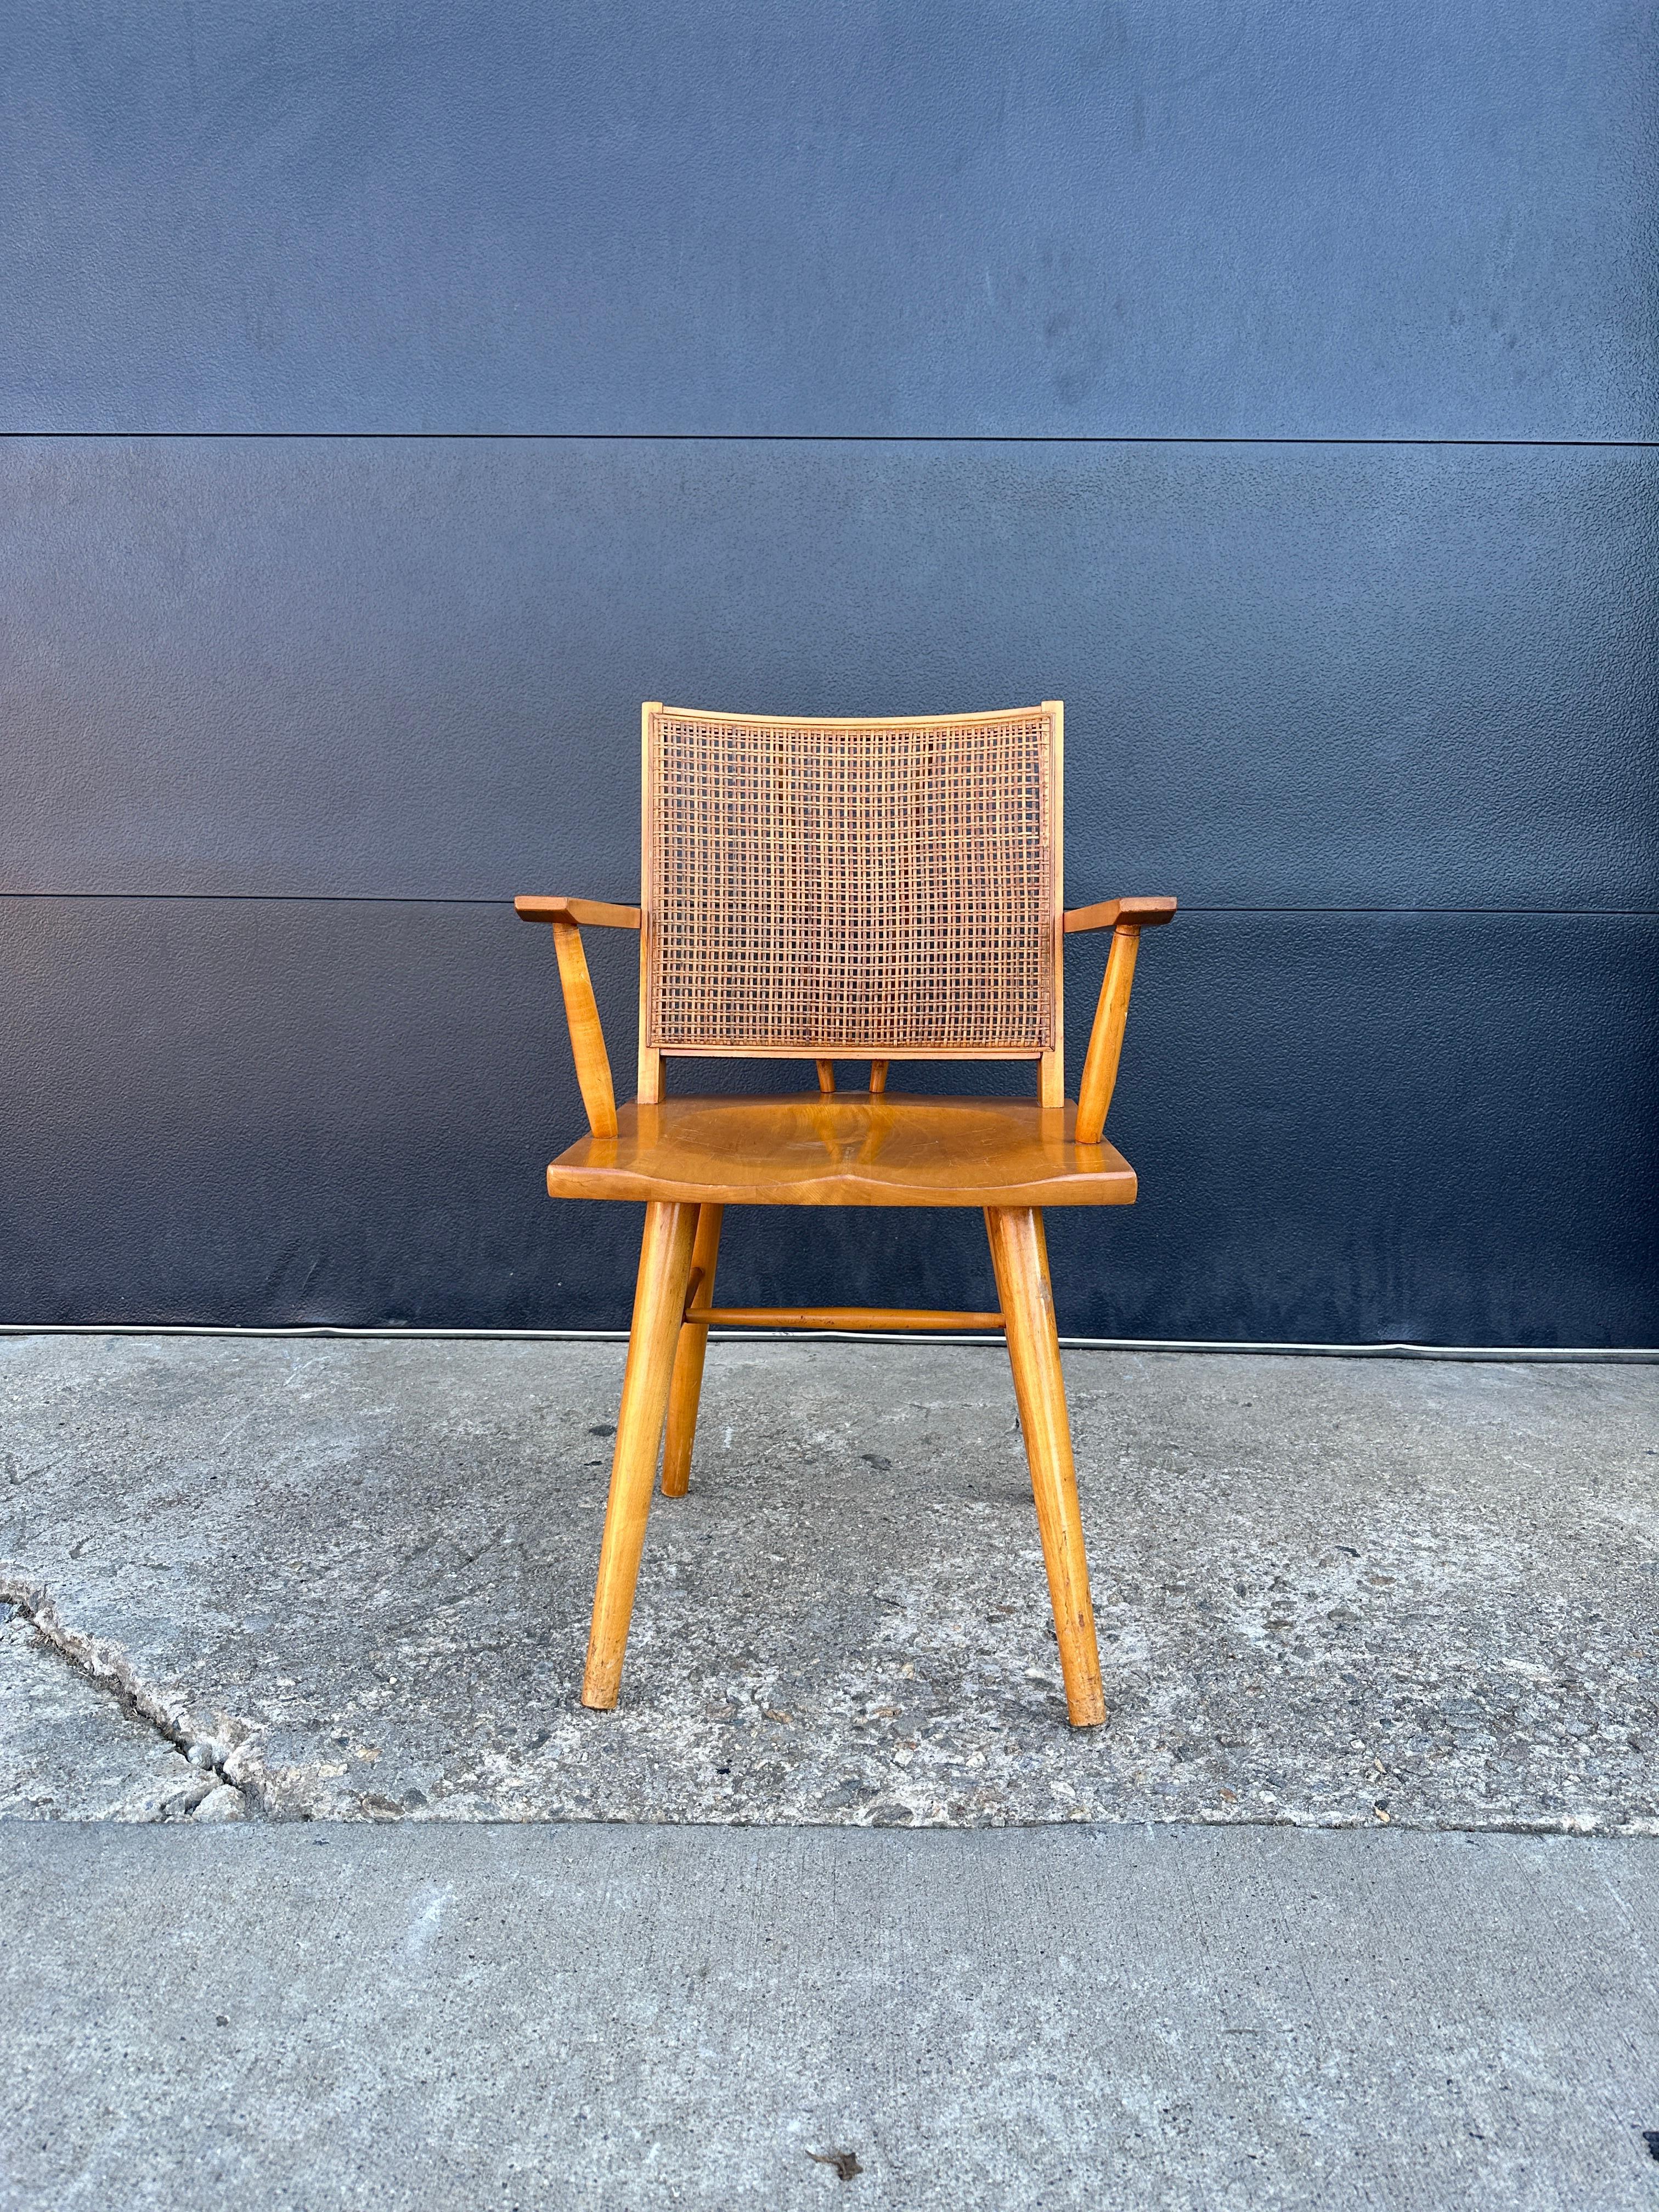 Solid maple and cane back armchair designed by Leslie Diamond for Conant Ball. Good overall condition and structurally sound and sturdy construction featuring a clean cane back with nicely tapered legs, stretcher base, contoured seat, curved and